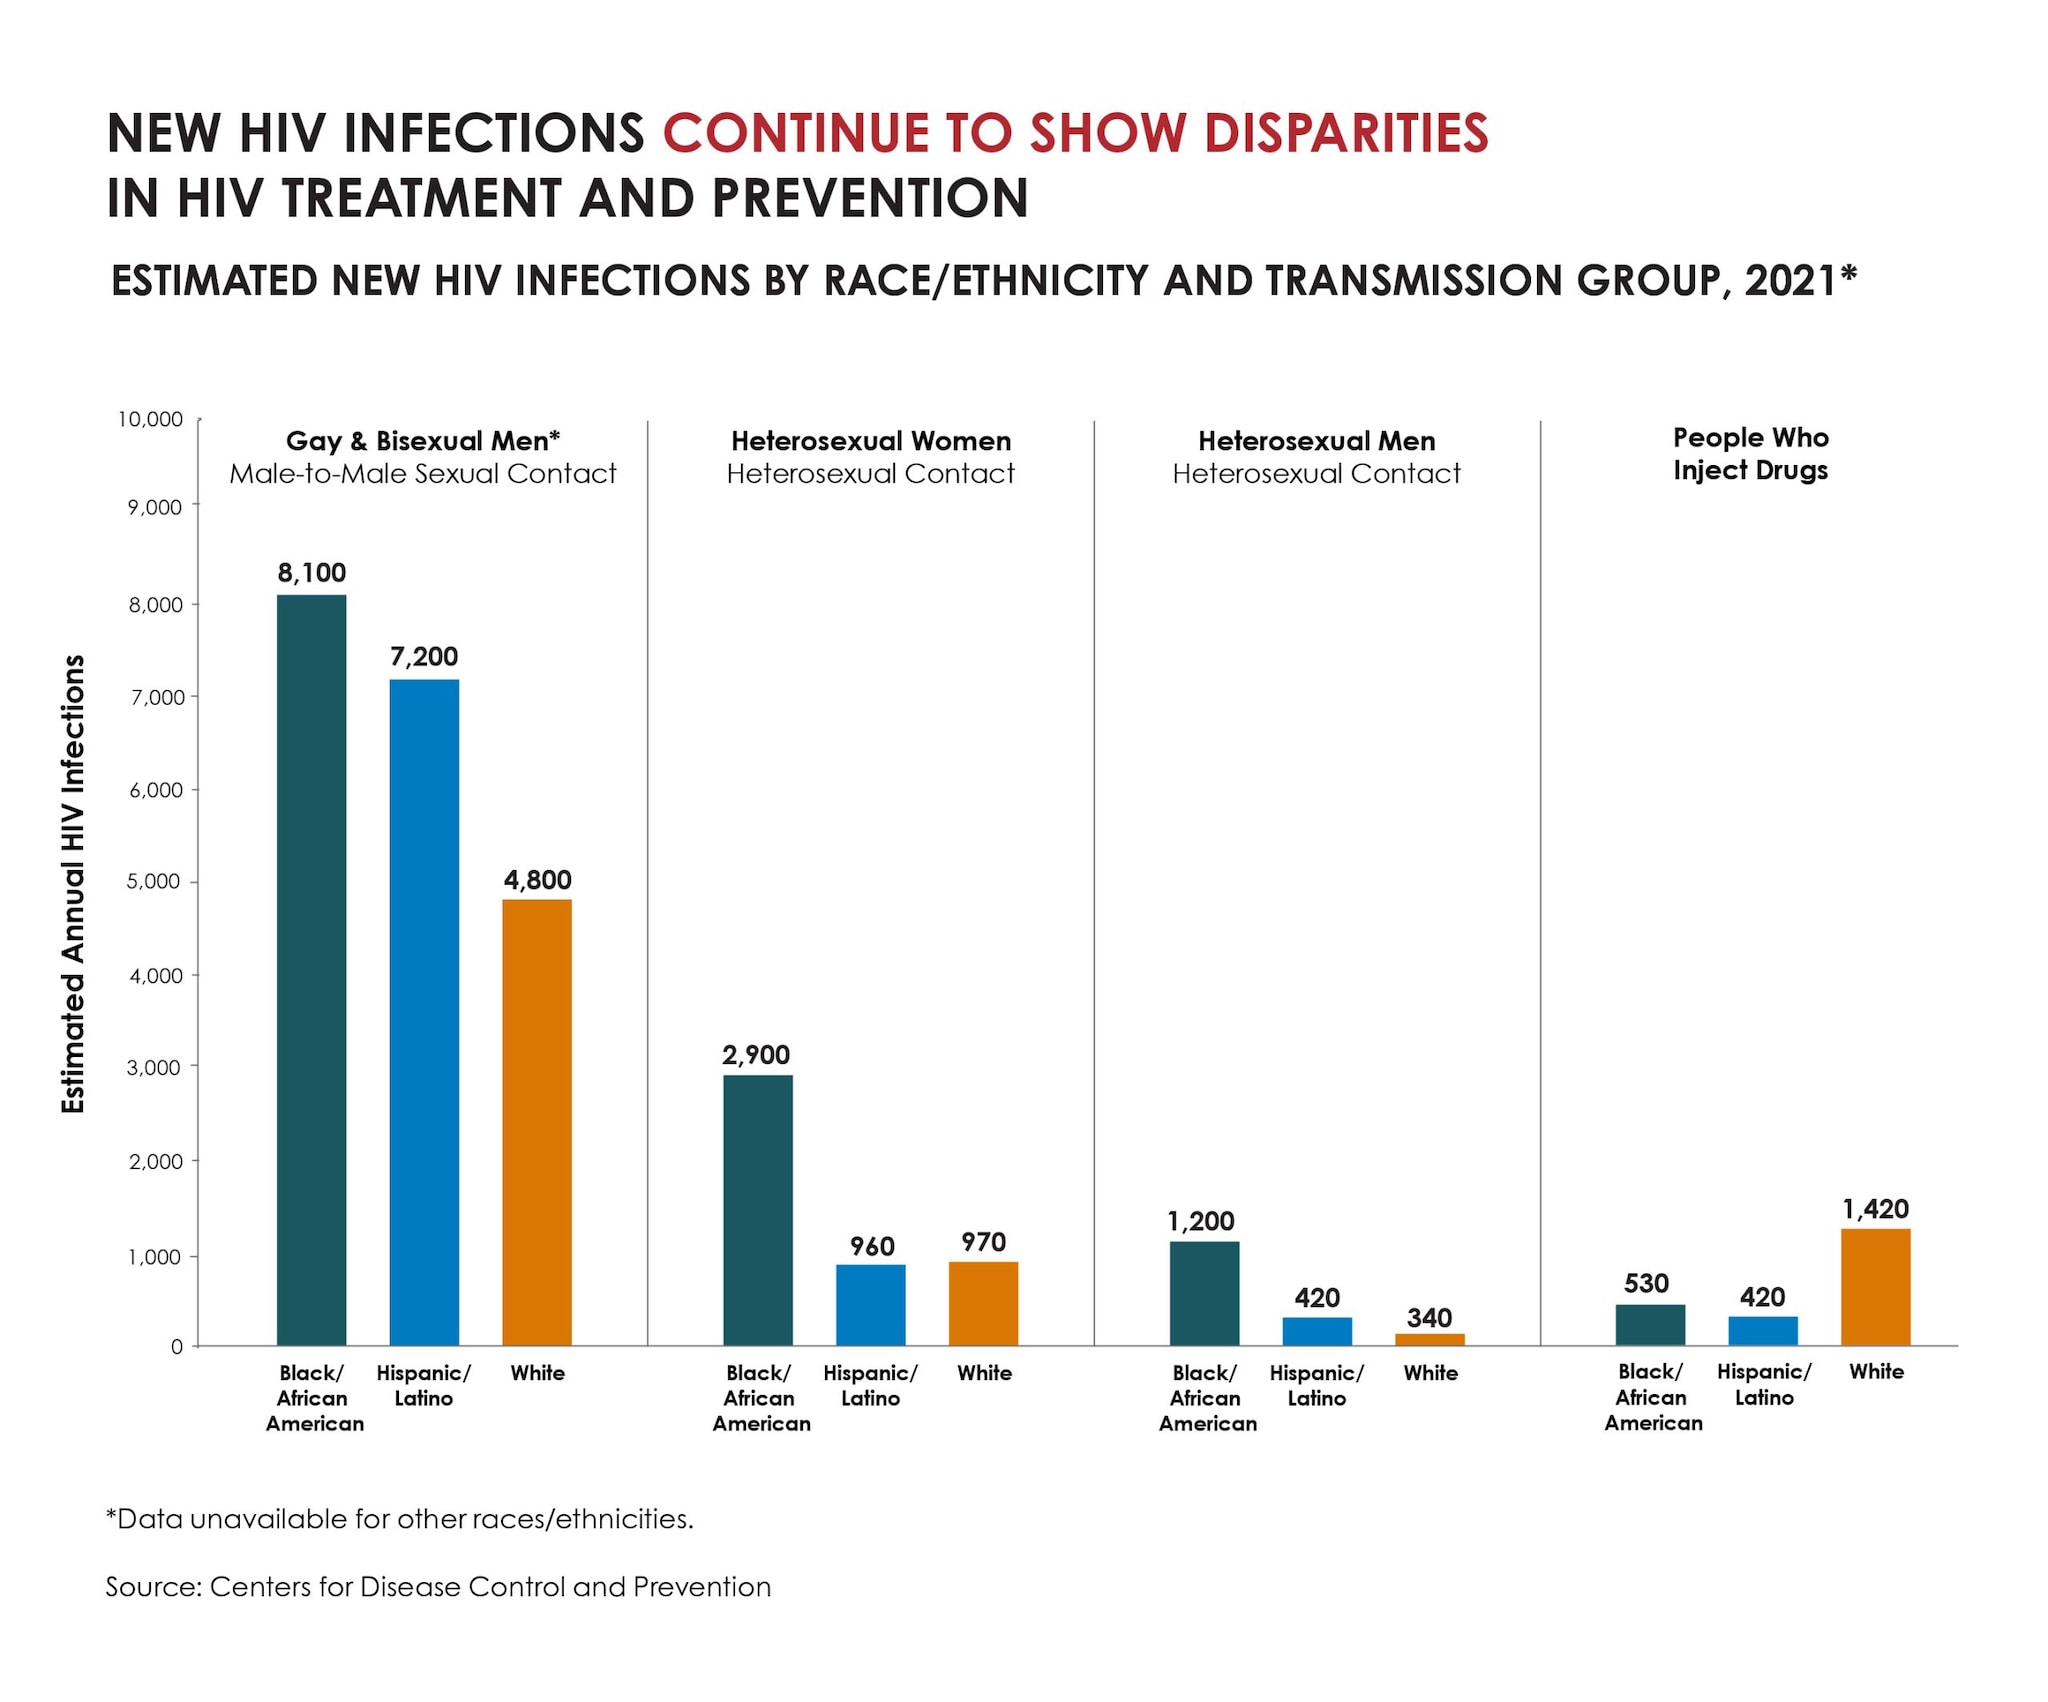 A bar chart showing estimated new HIV infections by race/ethnicity and transmission group in the U.S. in 2021. Chart shows racial/ethnic disparities differ by transmission group.